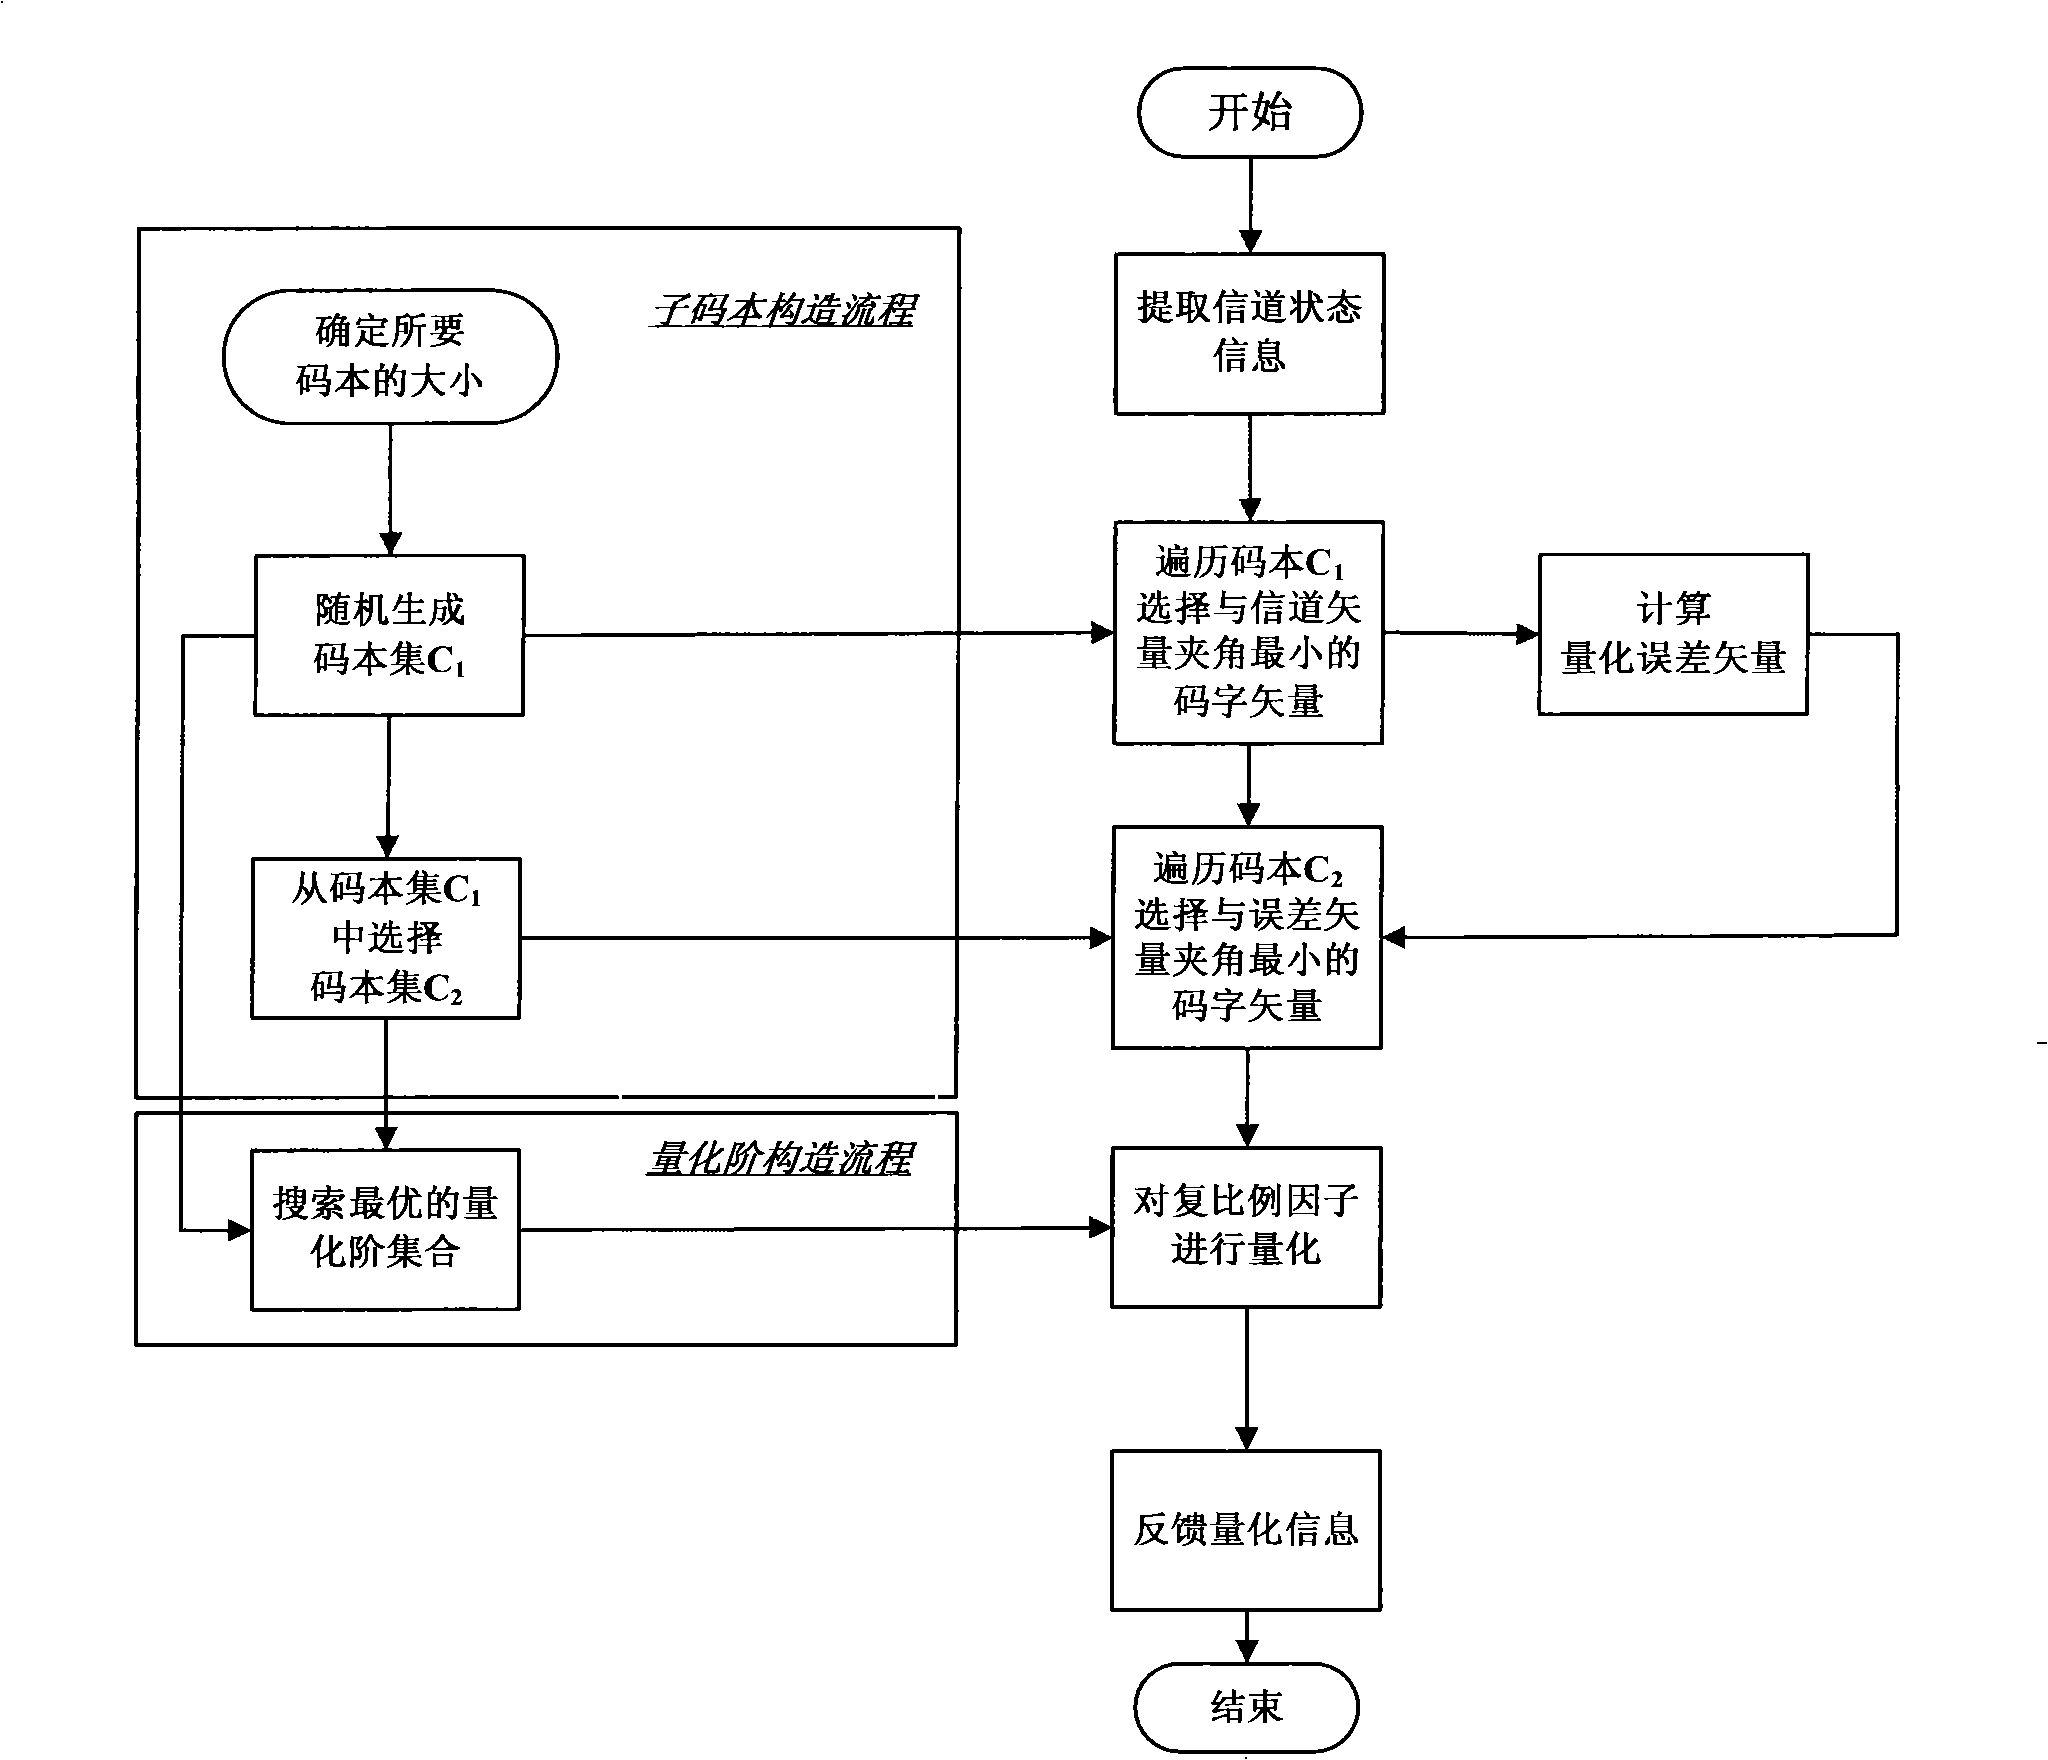 Method and device for quantizing multiuser MIMO system channel based on limiting feedback